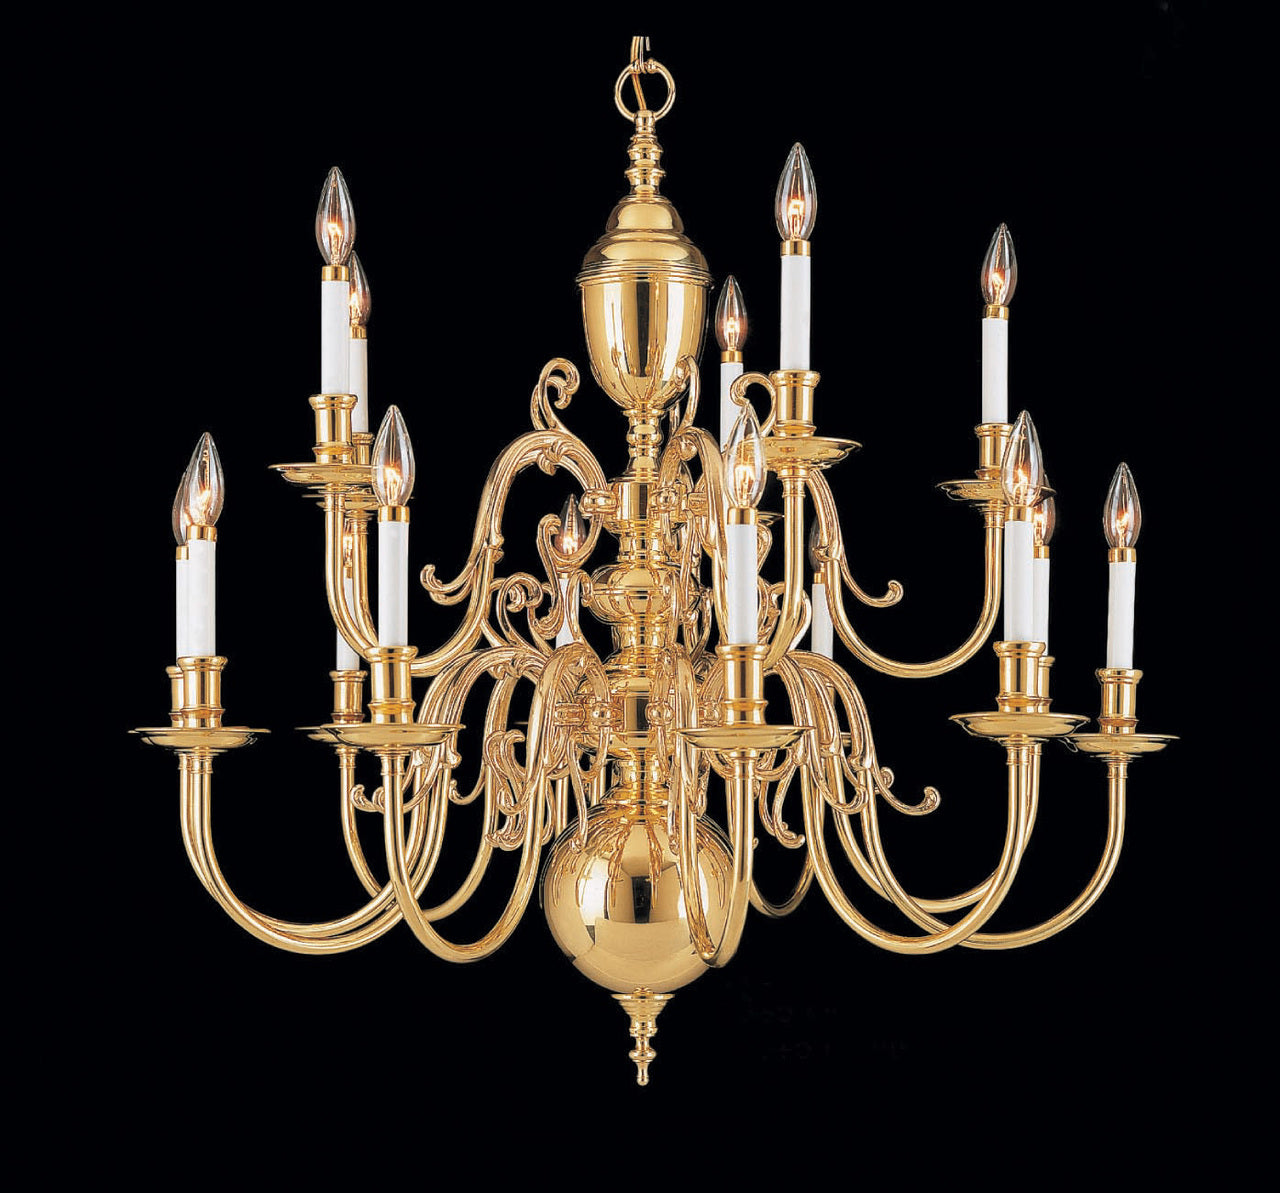 Classic Lighting 6743 Hermitage Traditional Chandelier in Polished Brass